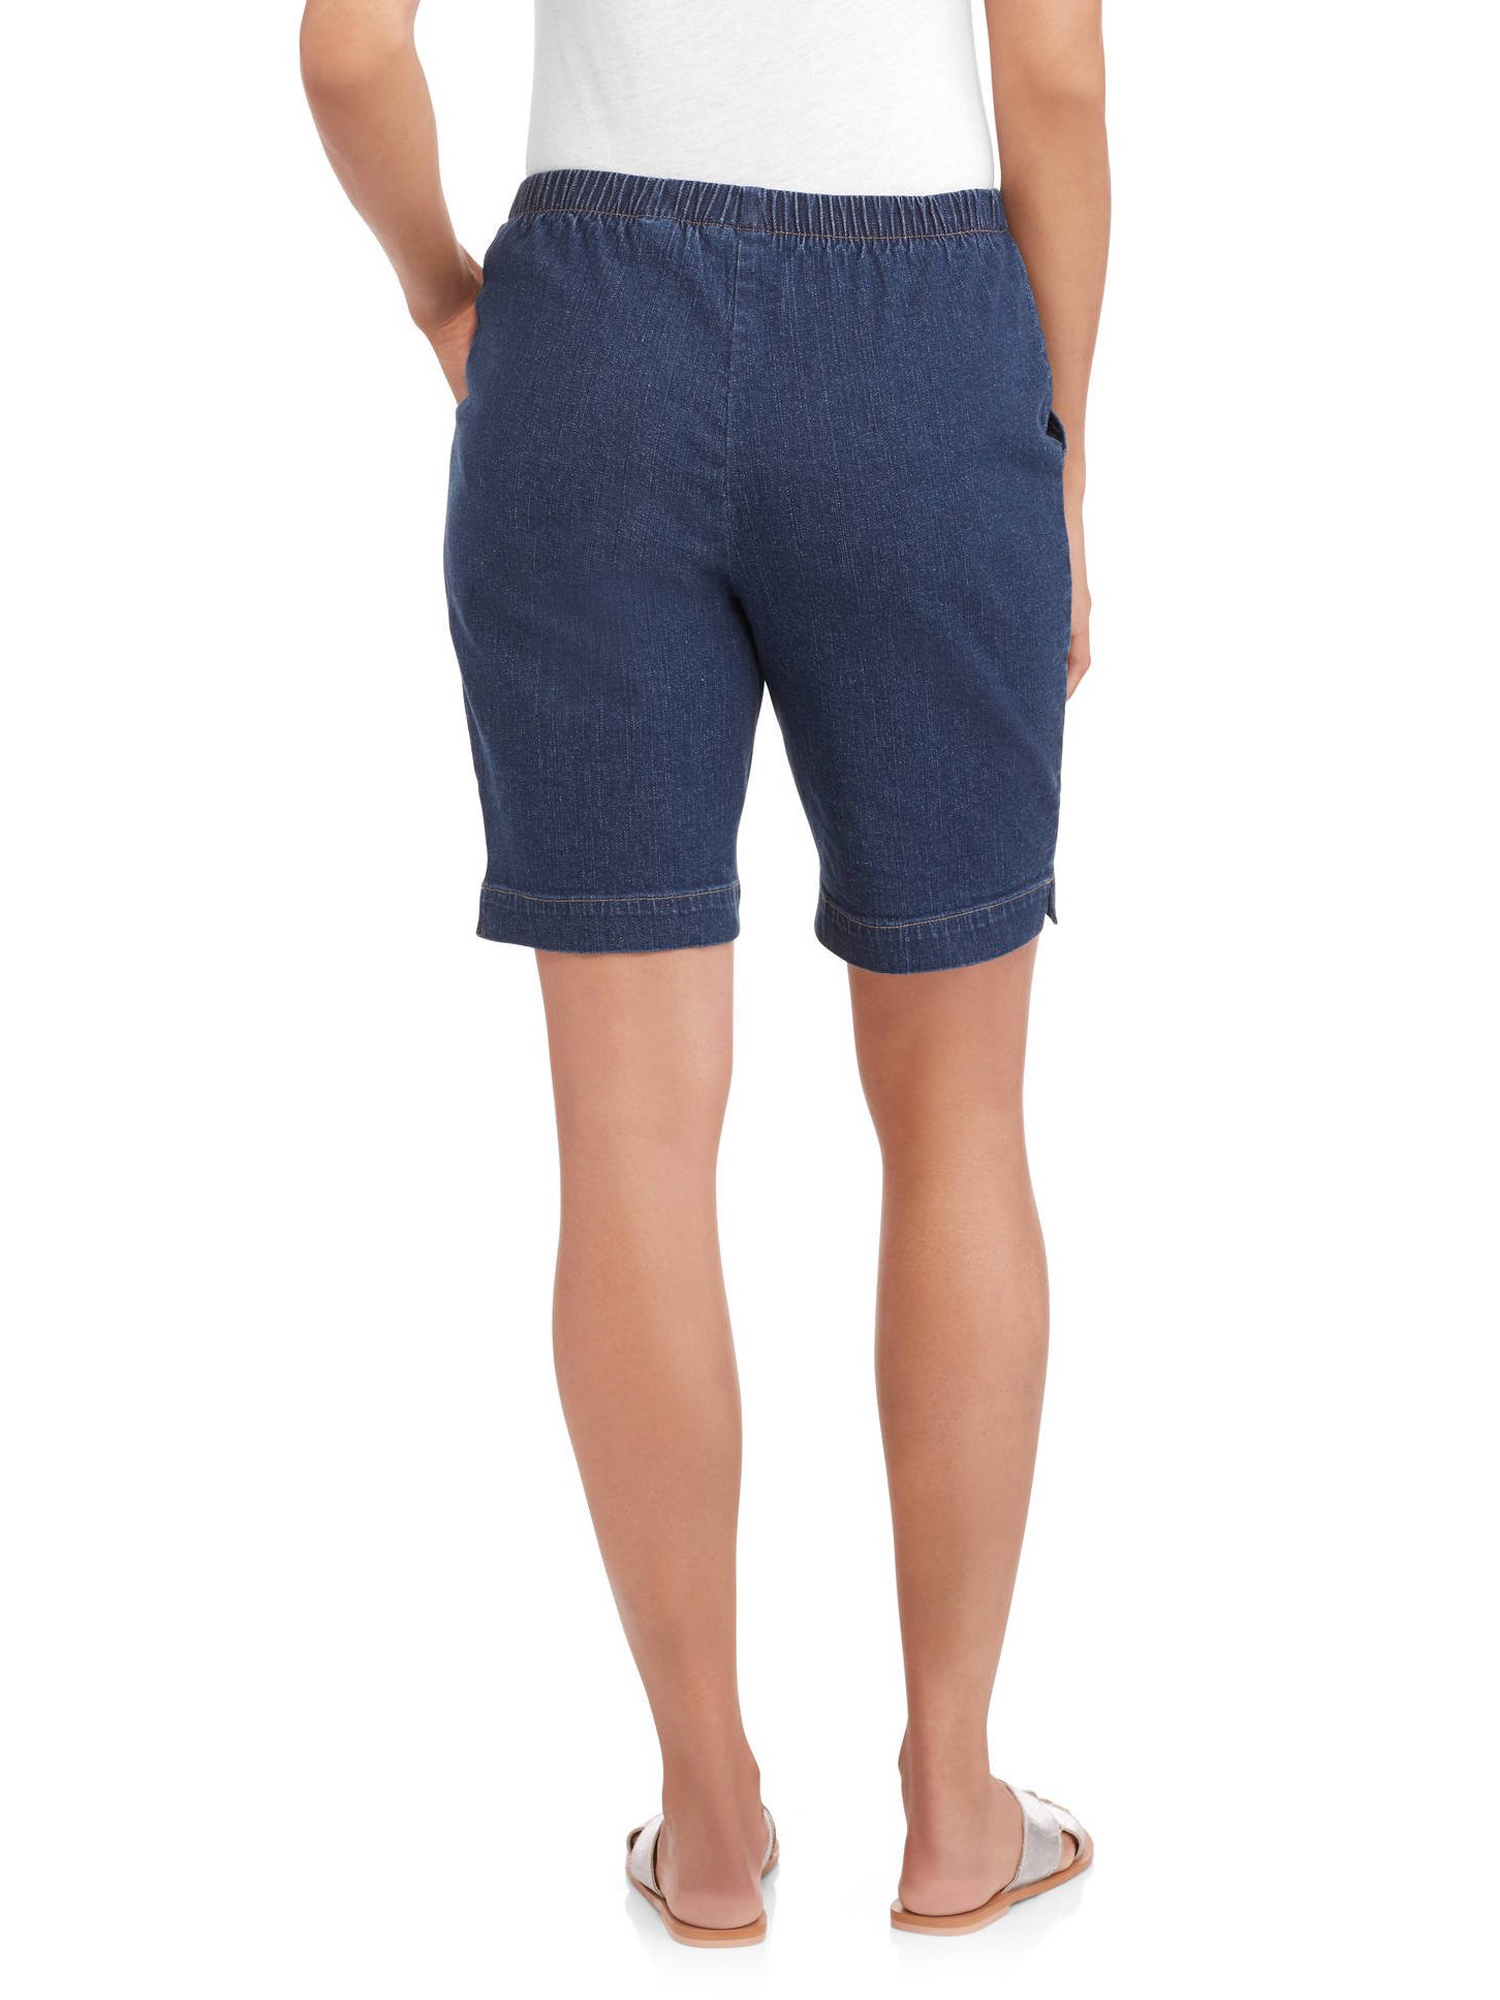 RealSize Women's 2-Pocket Pull On Stretch Shorts, Available in Petite Sizing - image 3 of 4